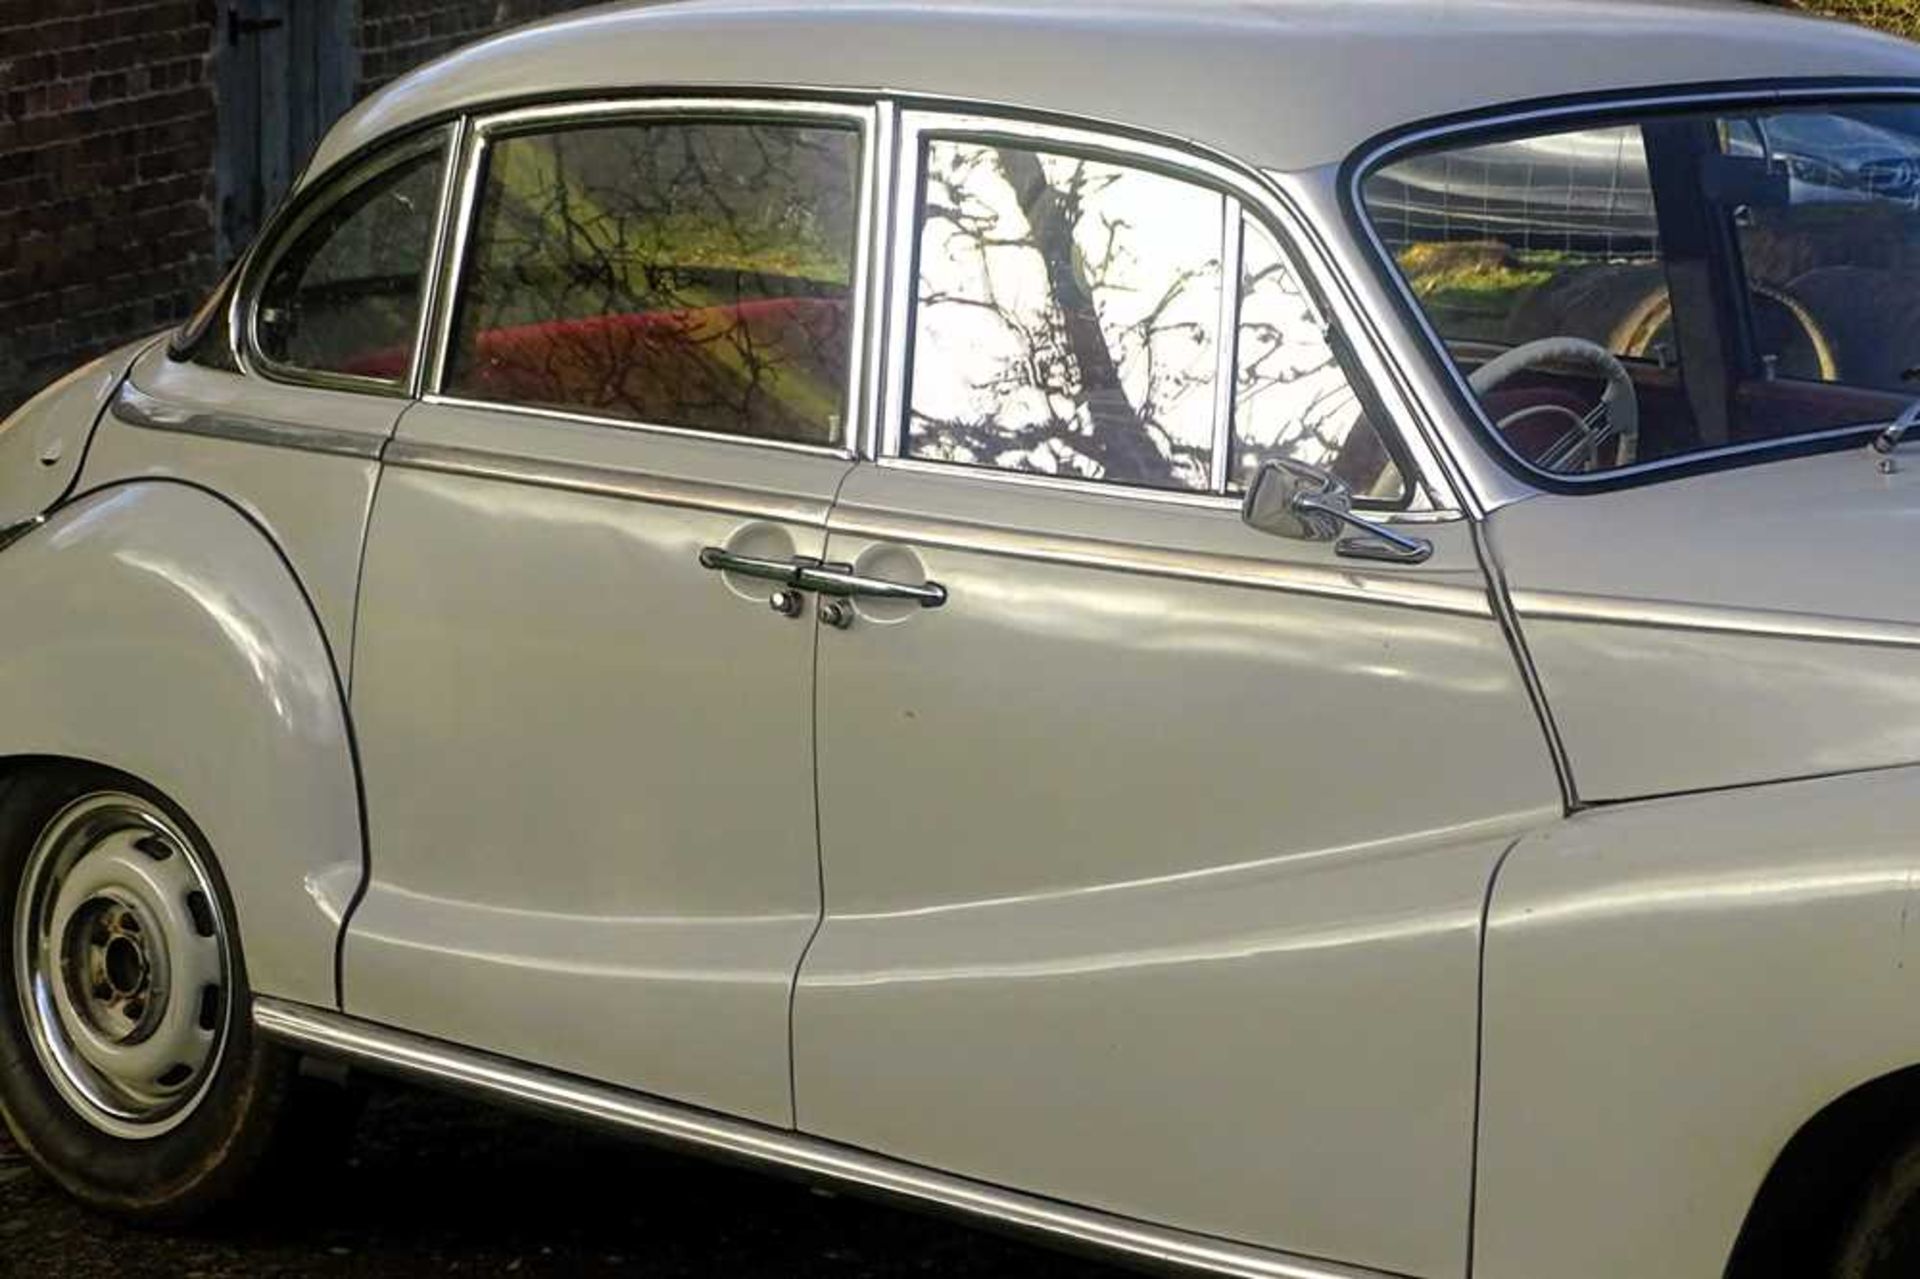 1957 BMW 502 Believed to be 1 of only 12 supplied new to the UK market - Image 17 of 64